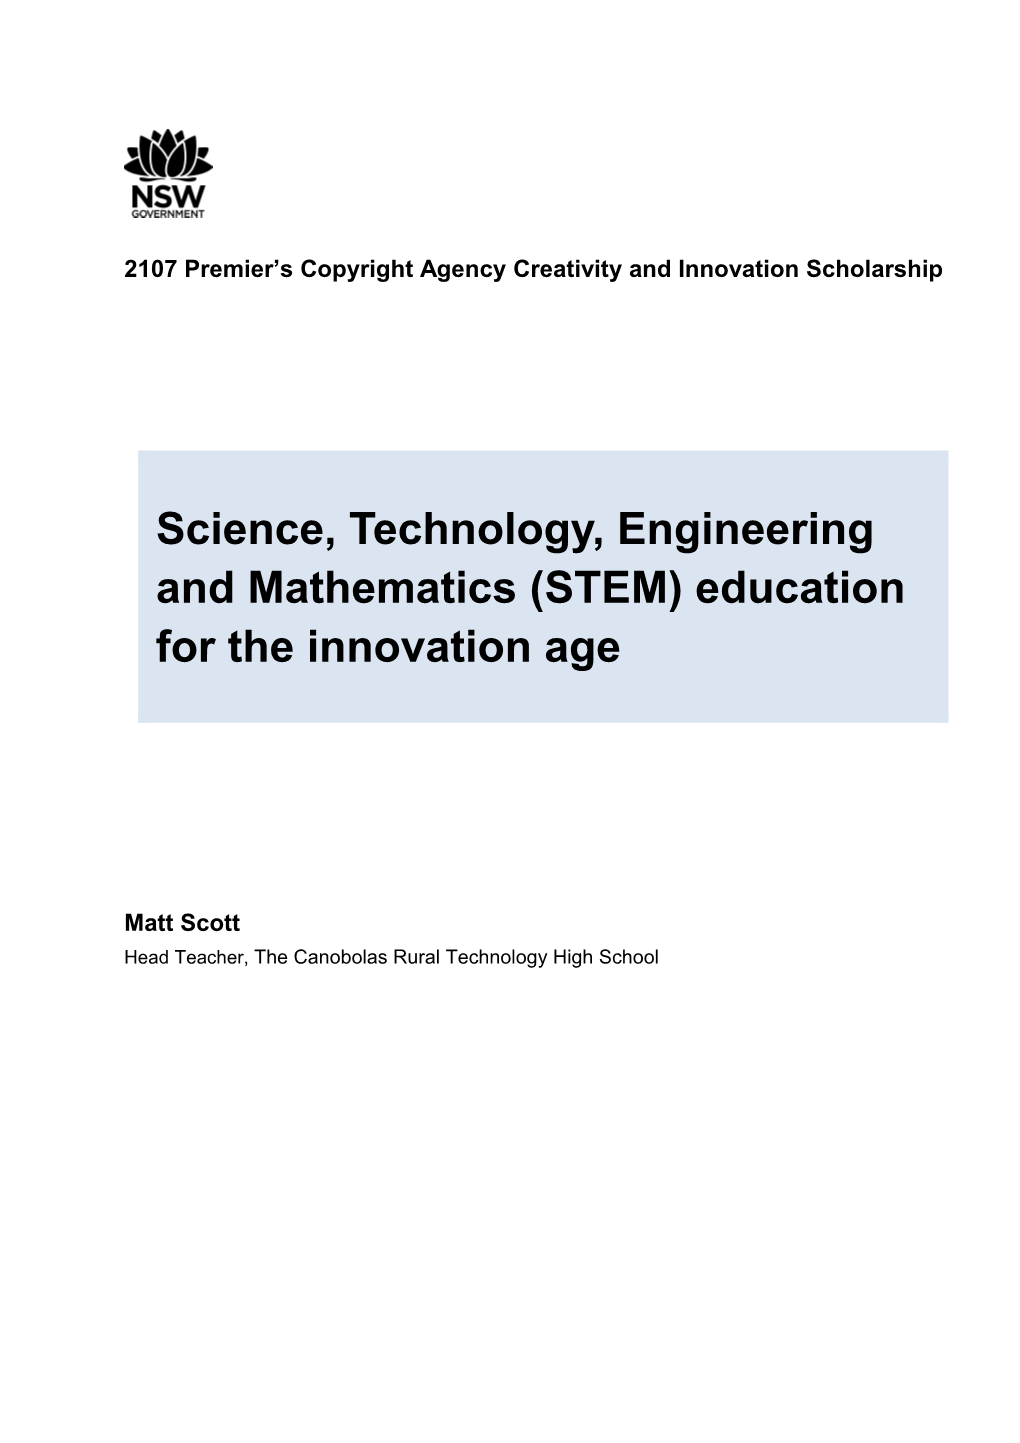 Science, Technology, Engineering and Mathematics (STEM) Education for the Innovation Age